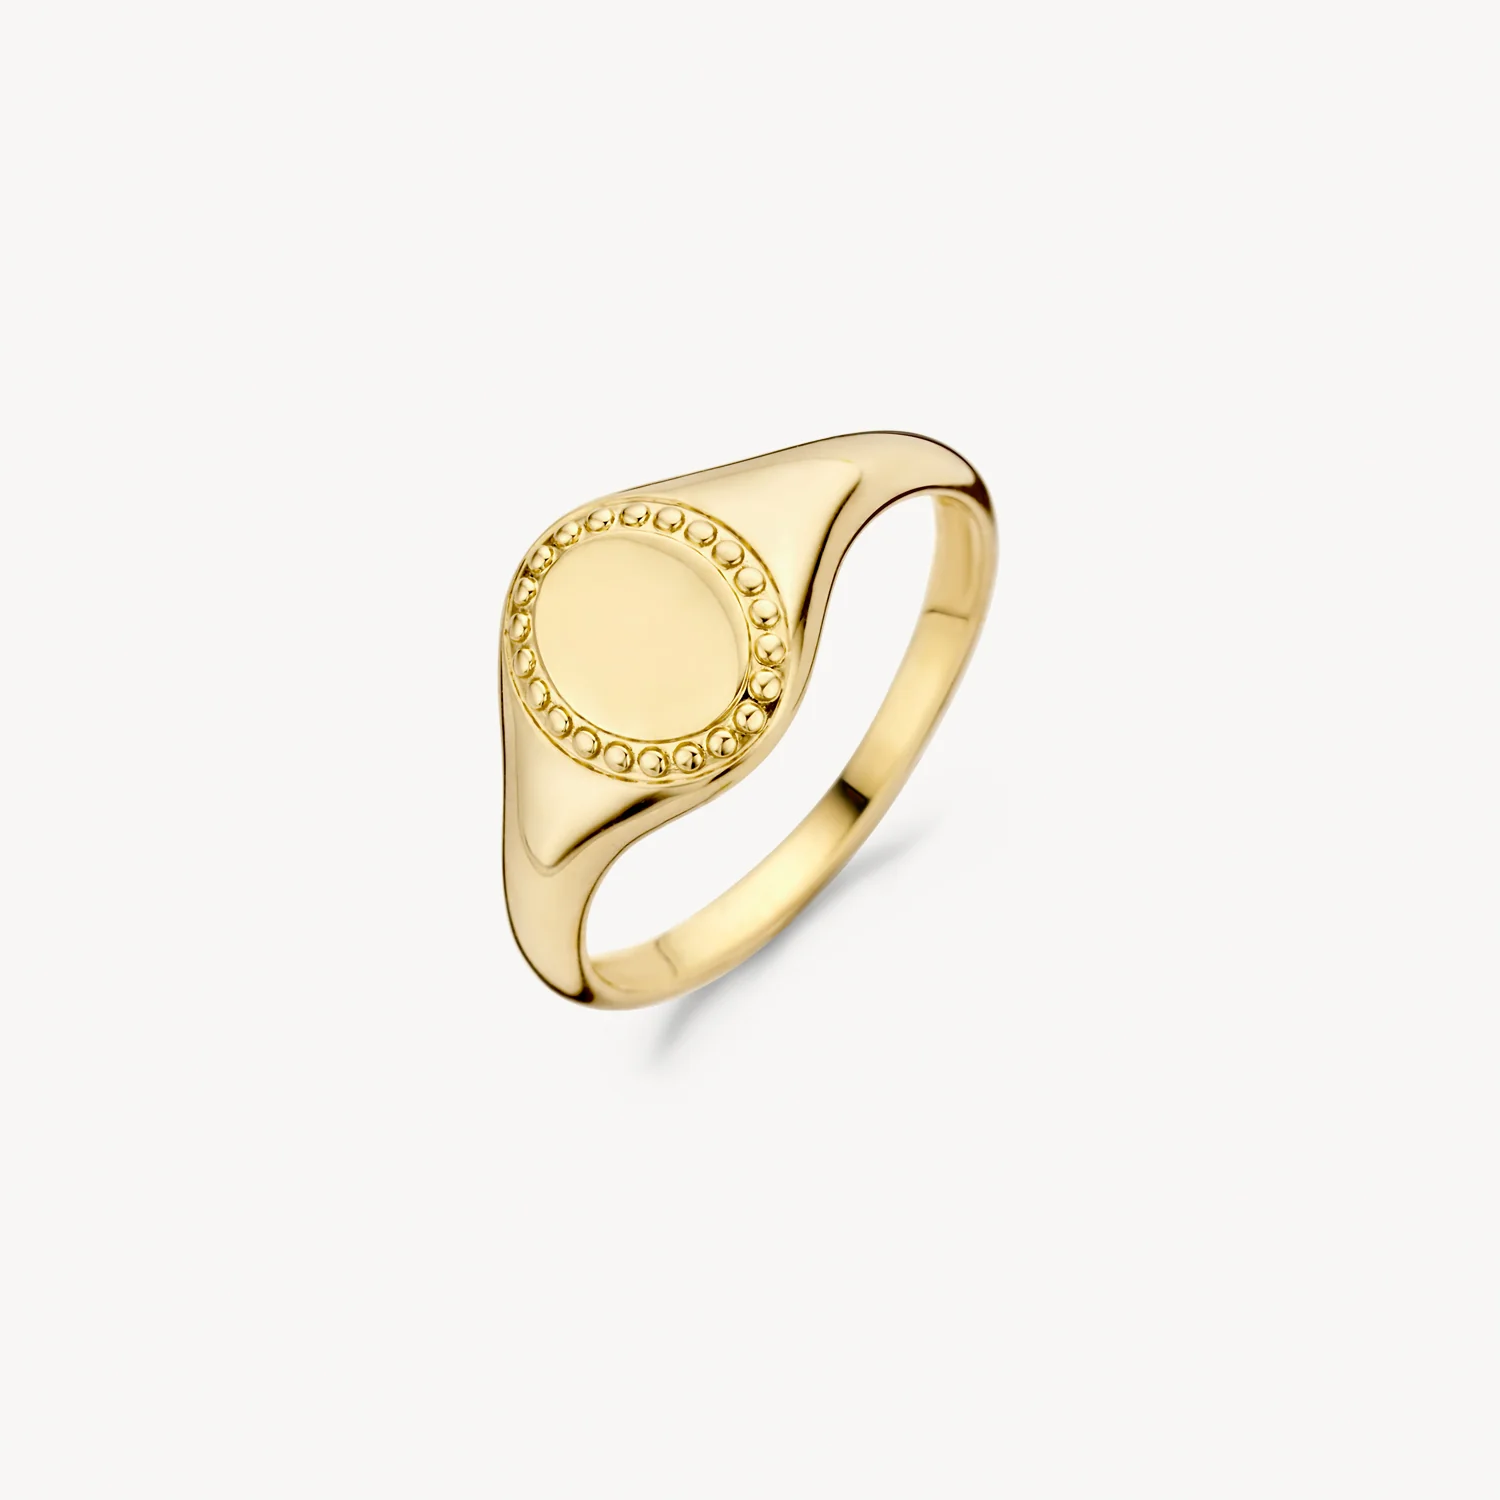 Blush Yellow Gold Oval Signet Ring